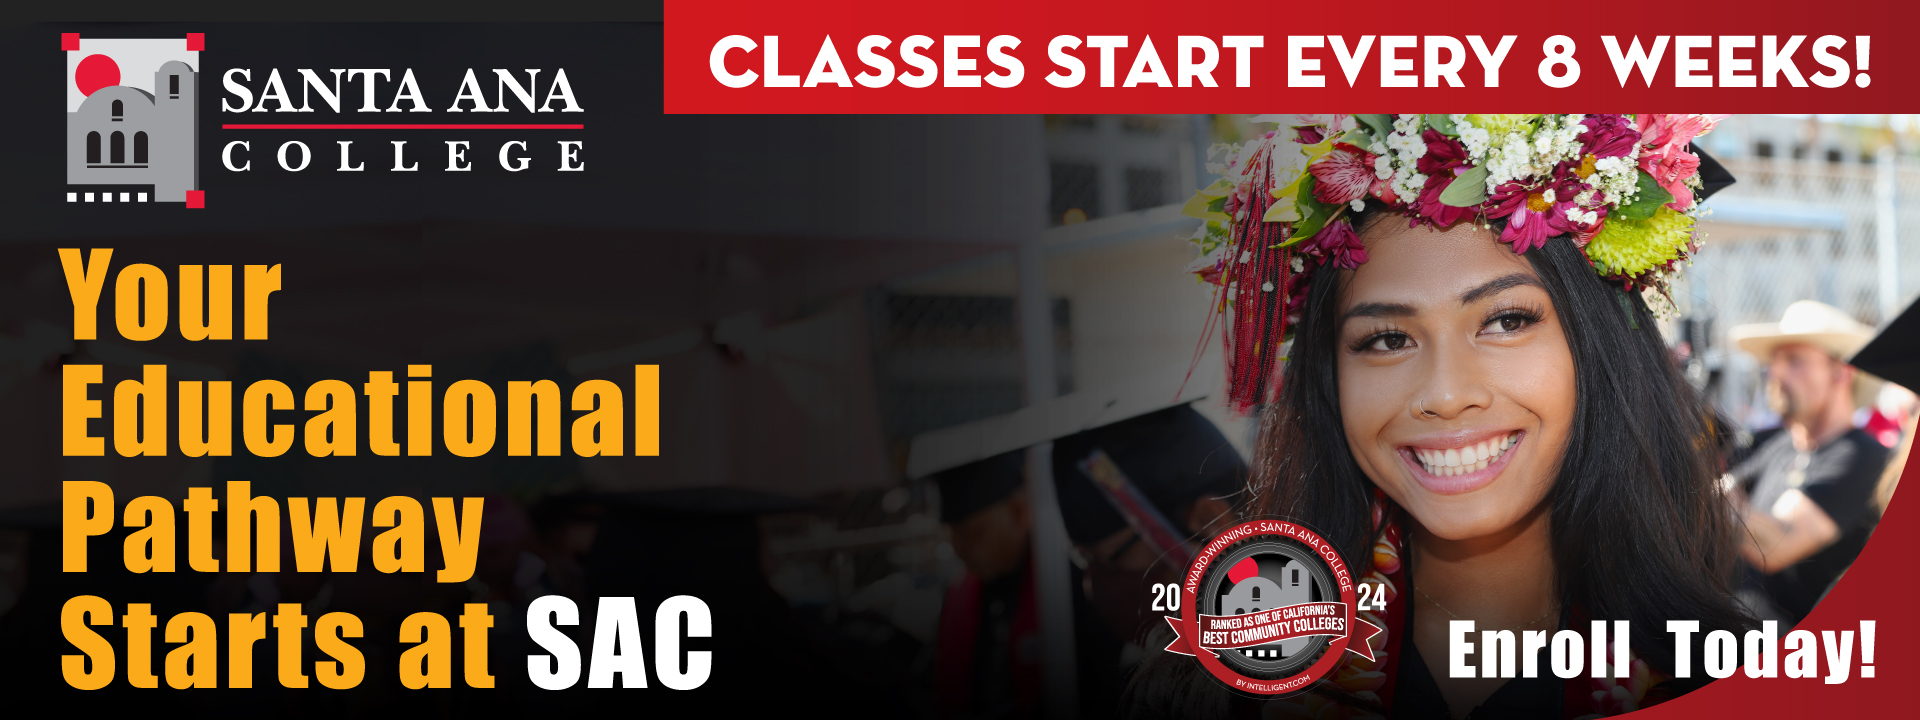 Your educational pathway starts at santa ana college